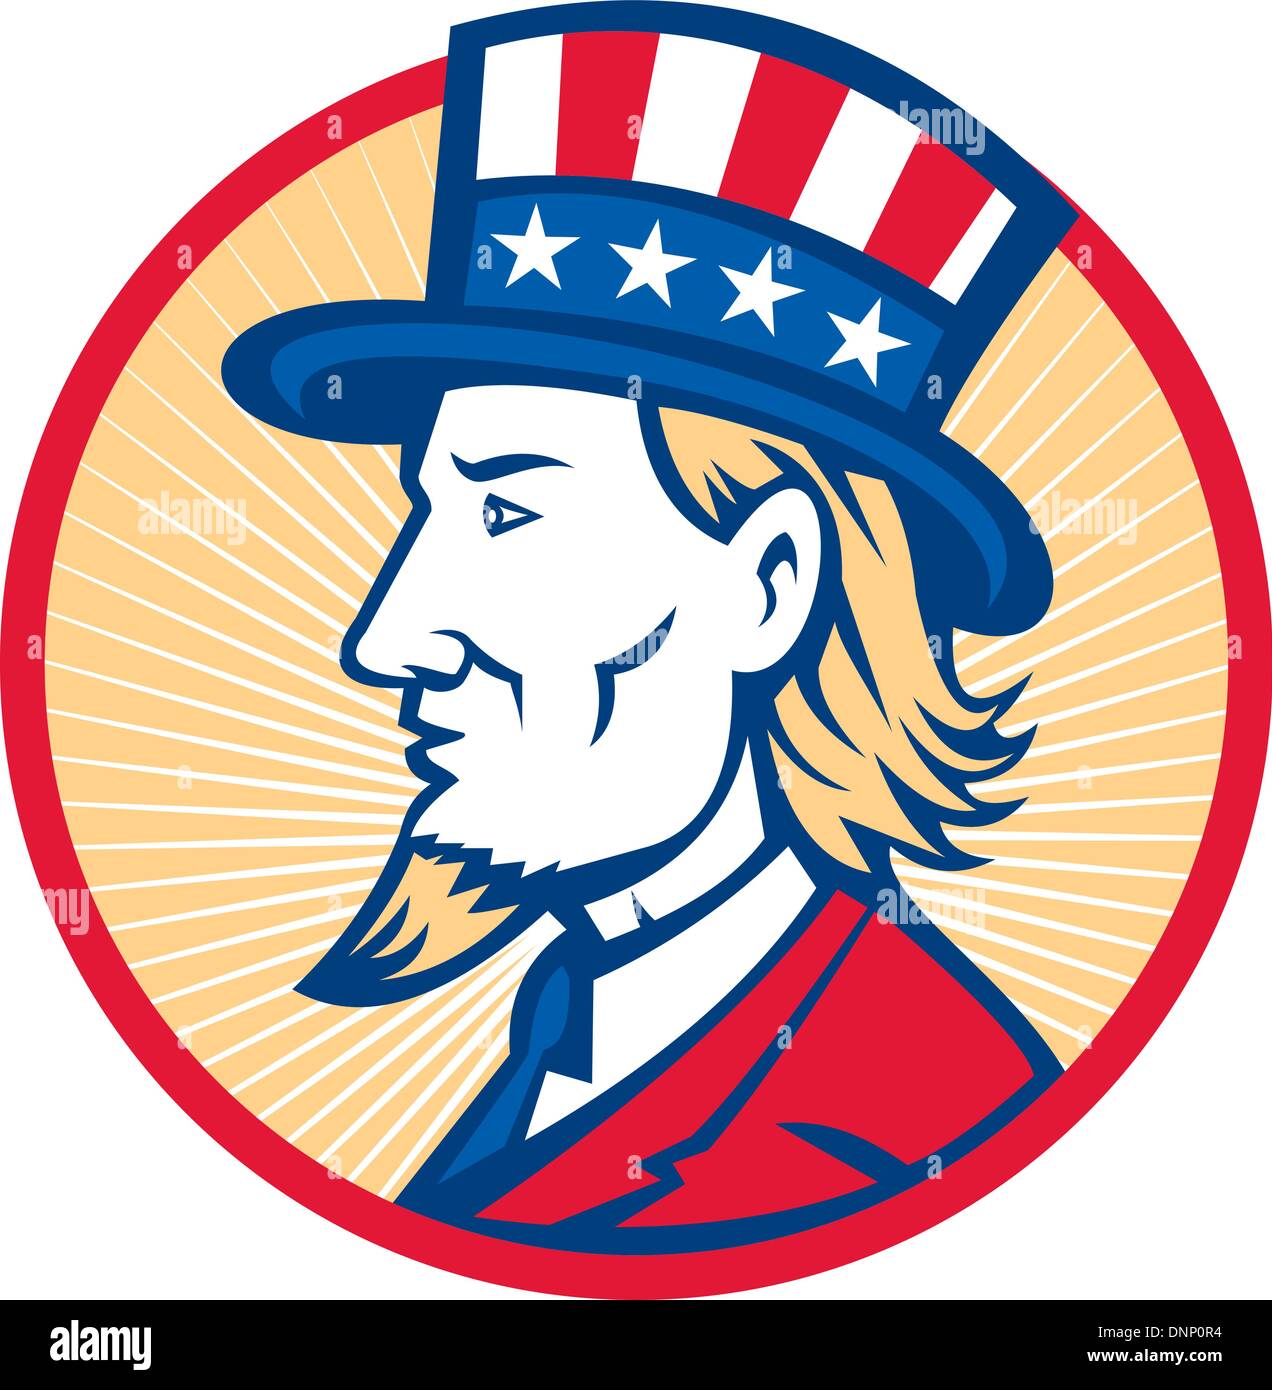 Illustration of Uncle Sam wearing hat with stars and stripes American flag viewed from side set inside circle. Stock Vector